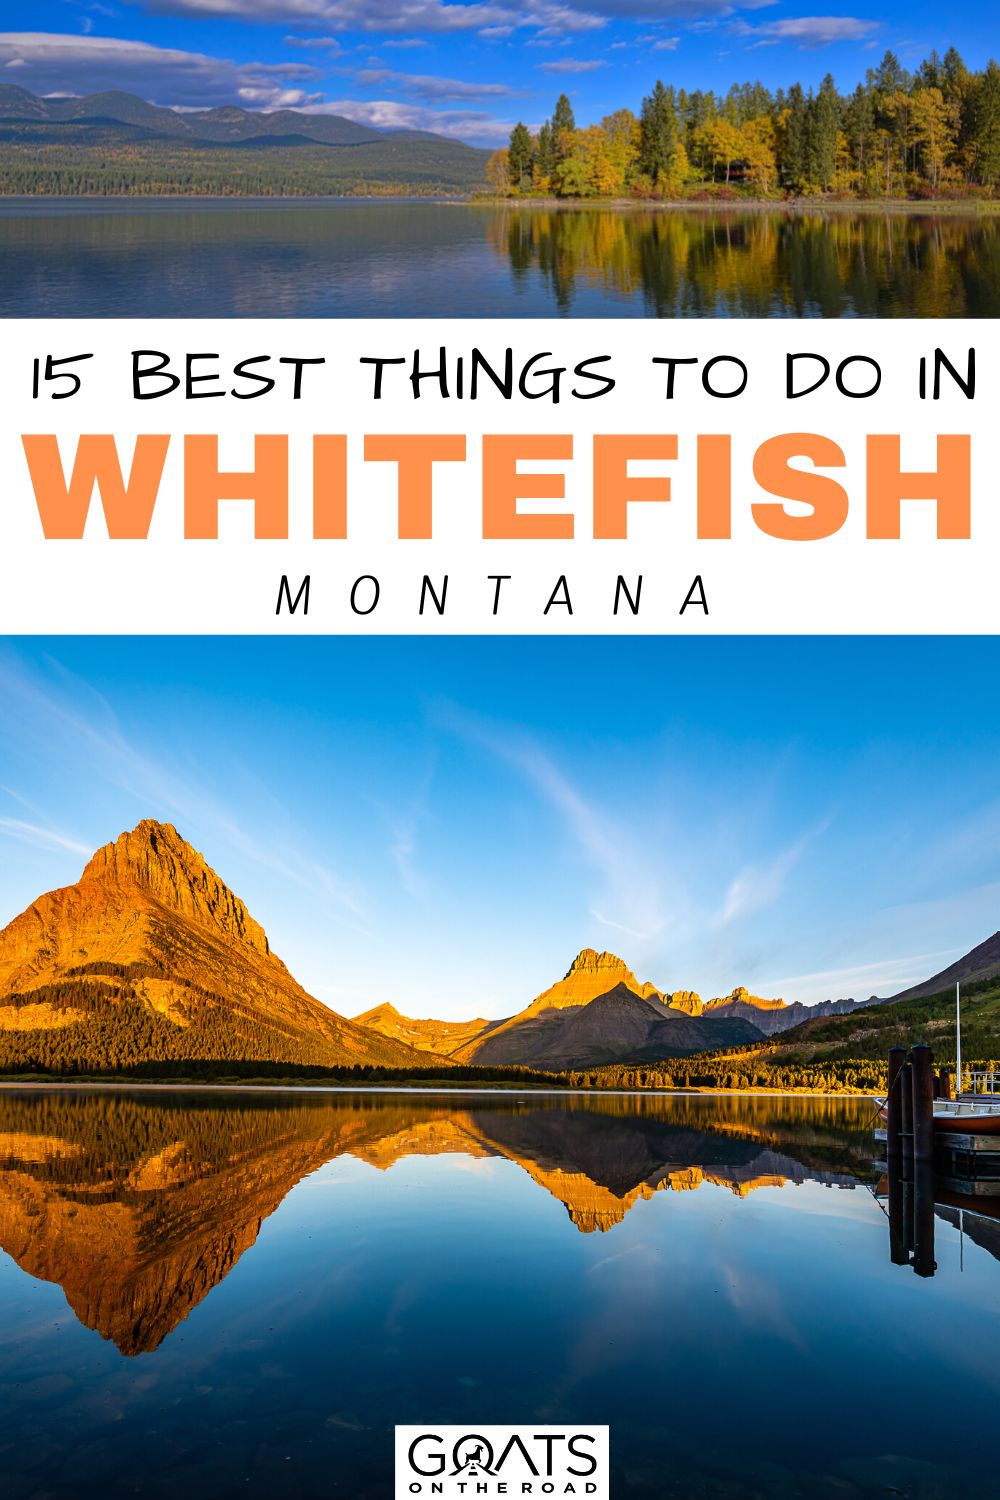 “15 Best Things To Do in Whitefish, MT